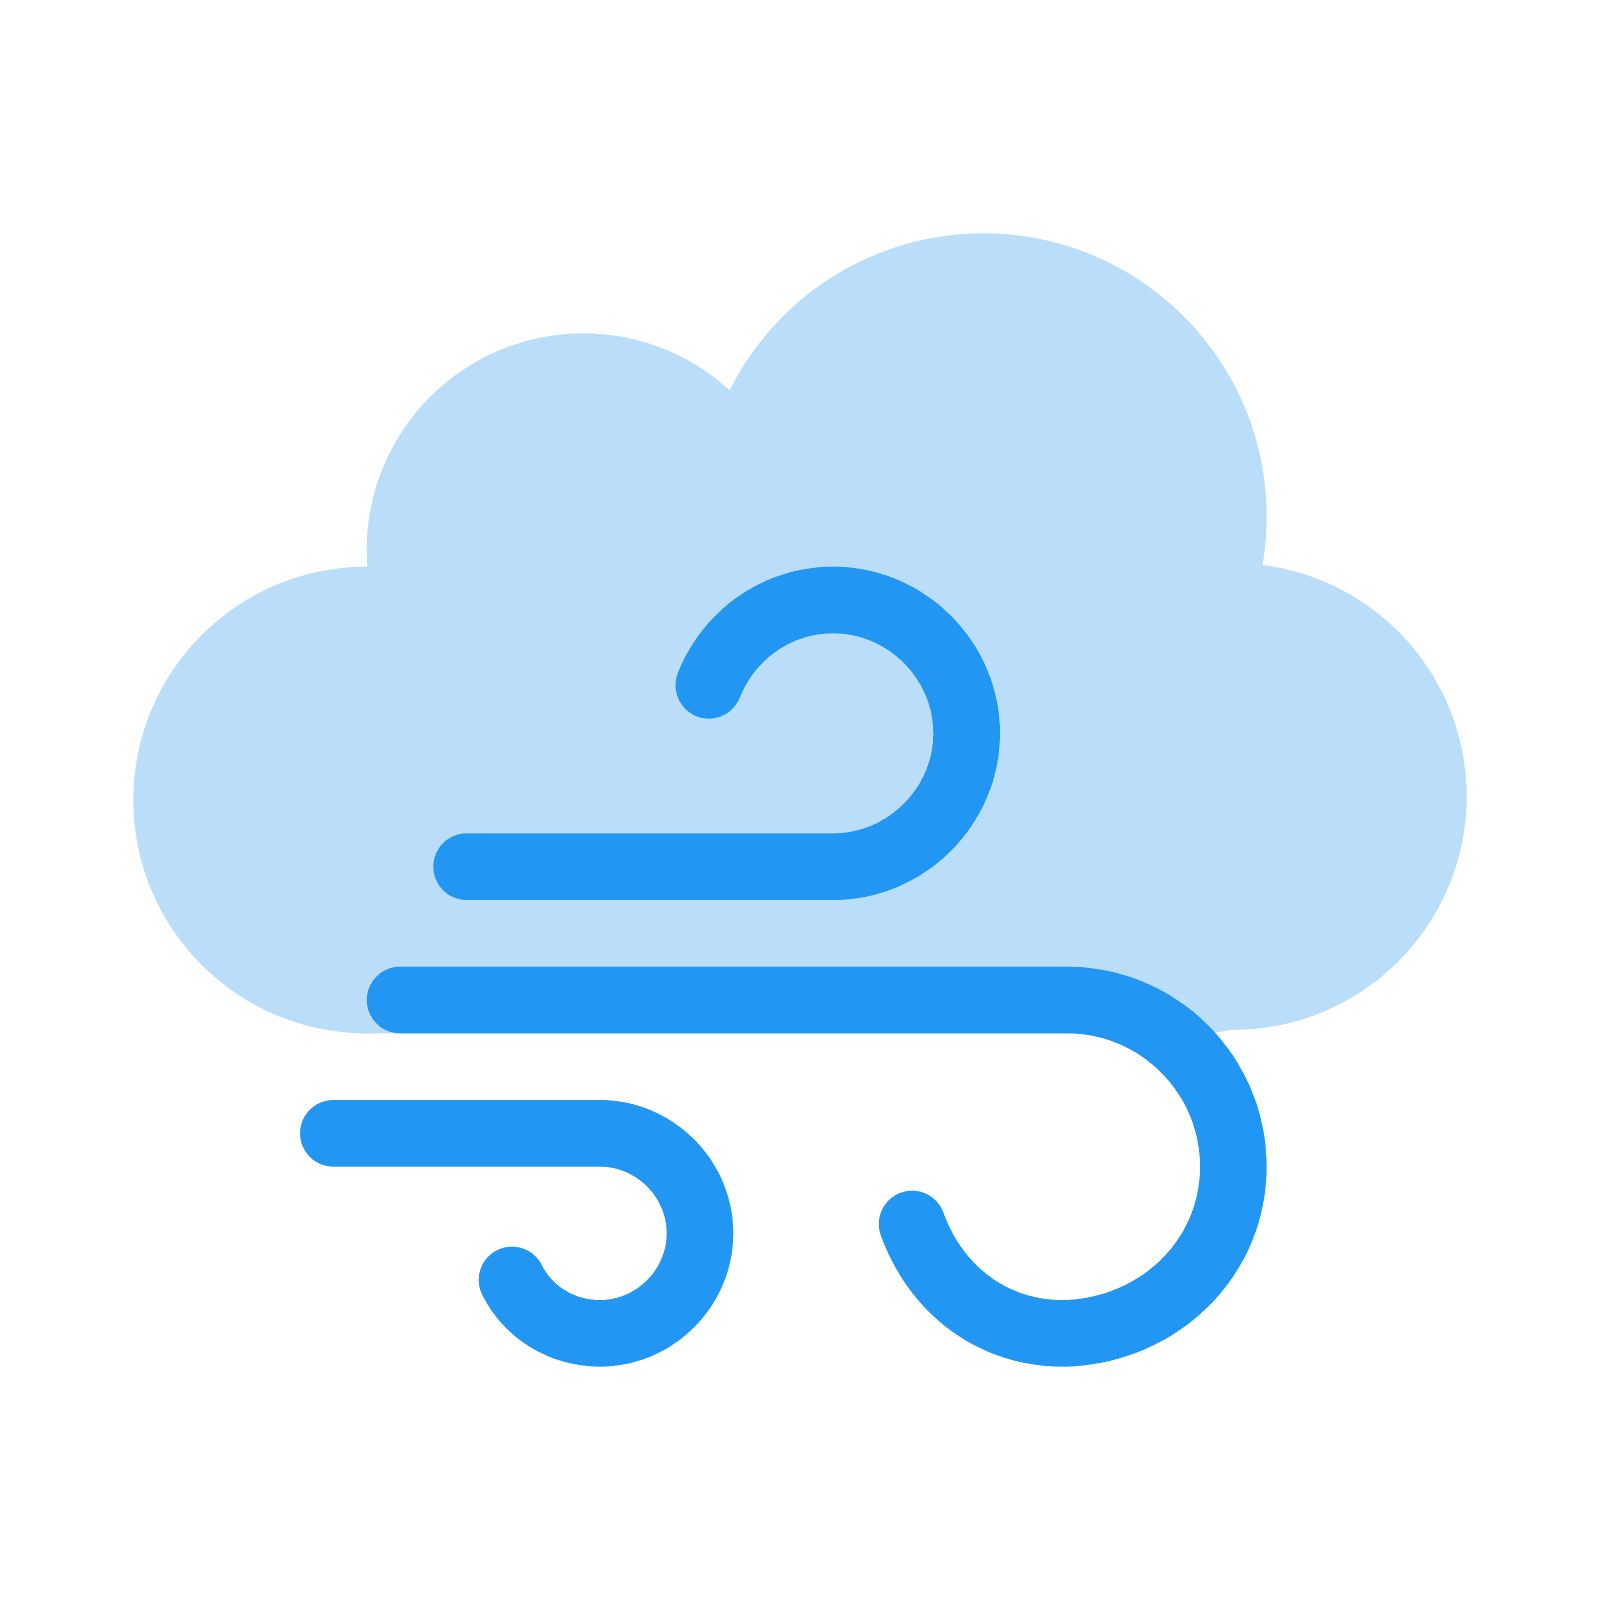 Weather at getdrawings com. Clipart cloud windy